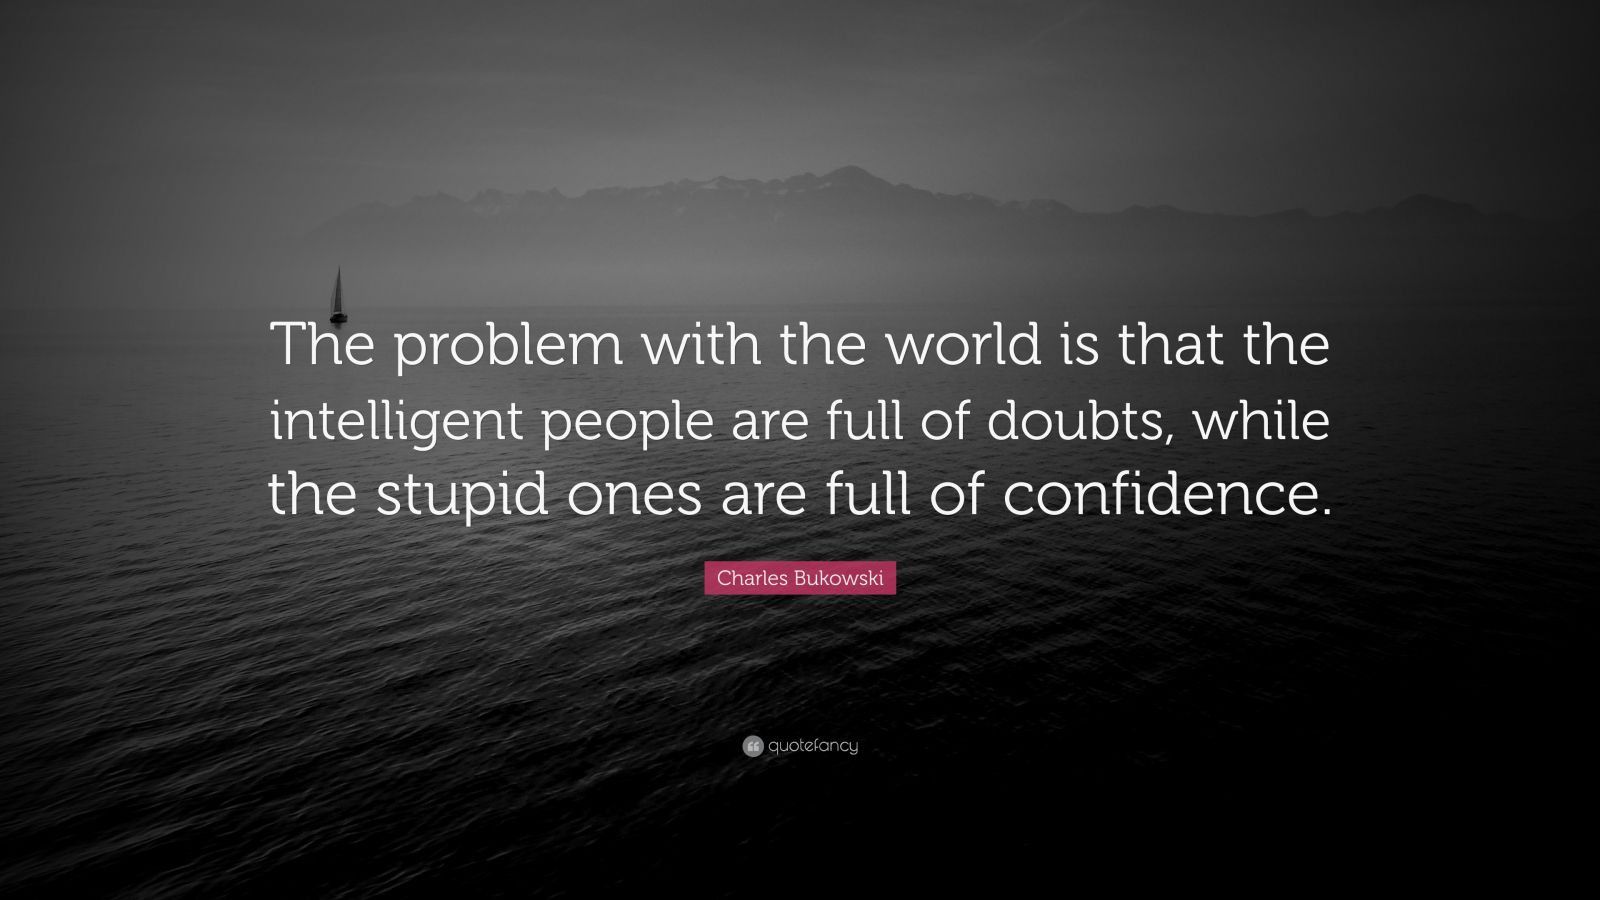 Charles Bukowski Quote: “The problem with the world is that the ...